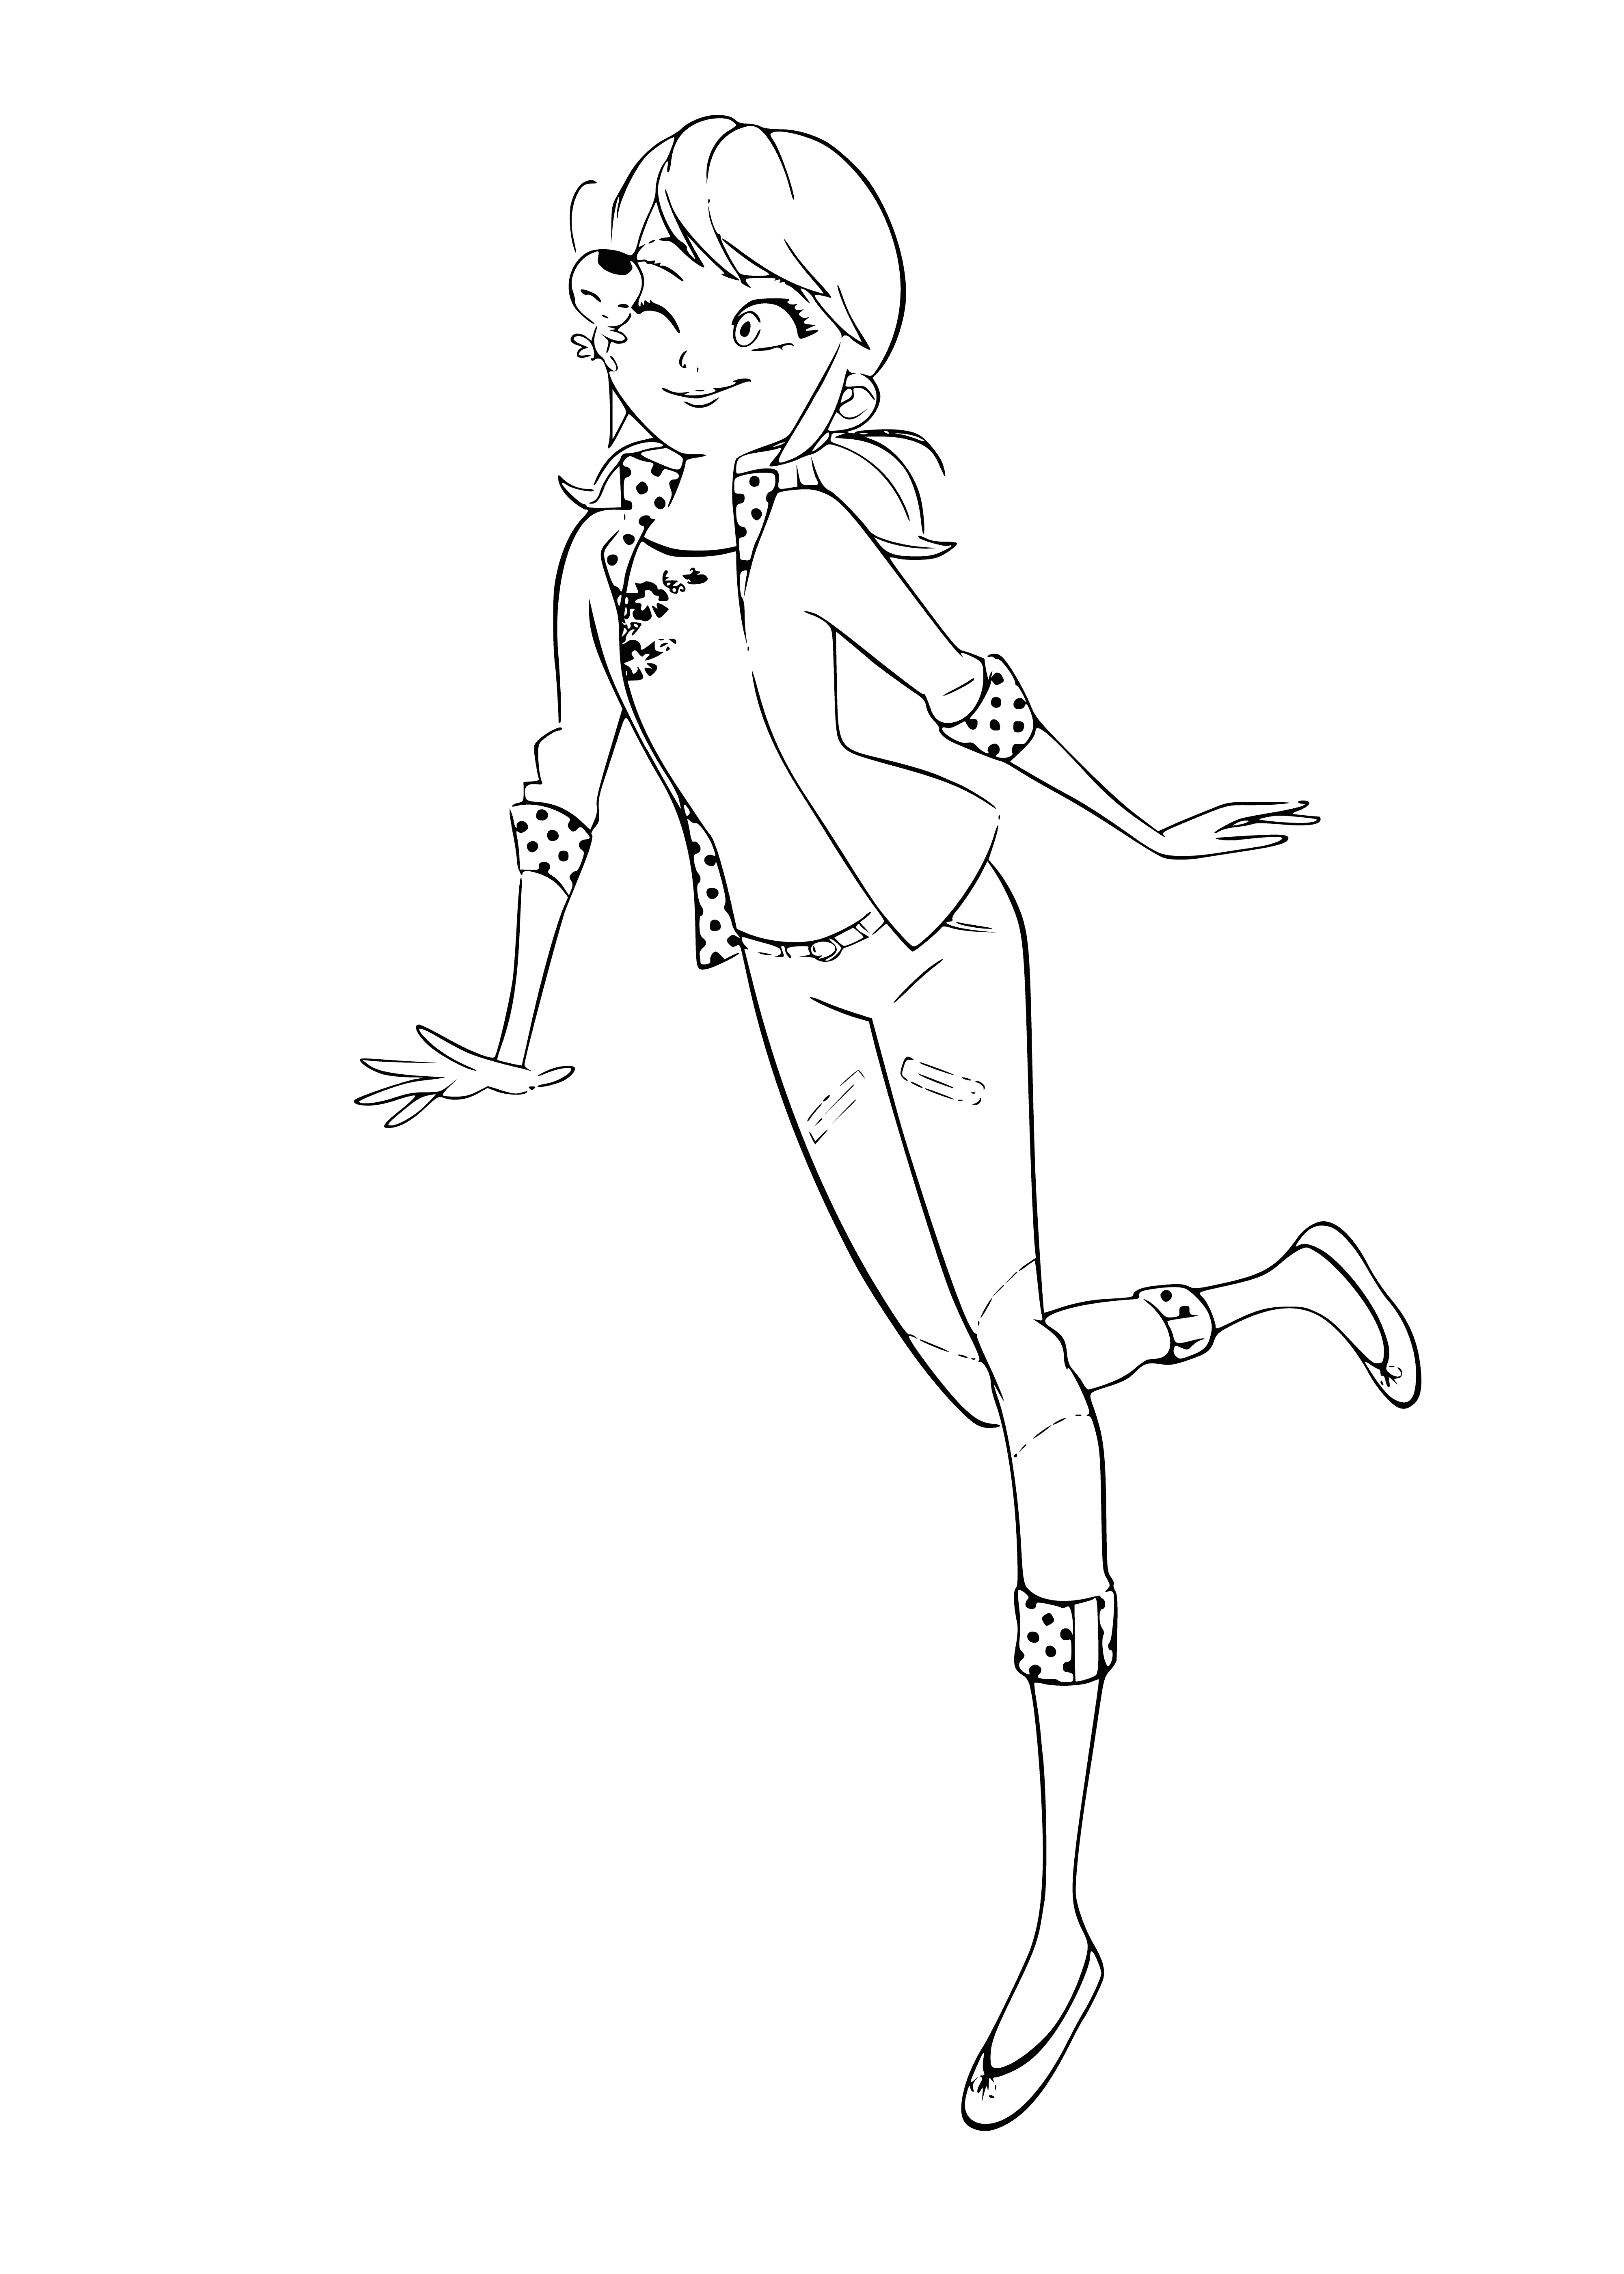 coloring page: Marinette says goodbye to her friends and heads home with Tikki, purse clutched close, smiling all the way.